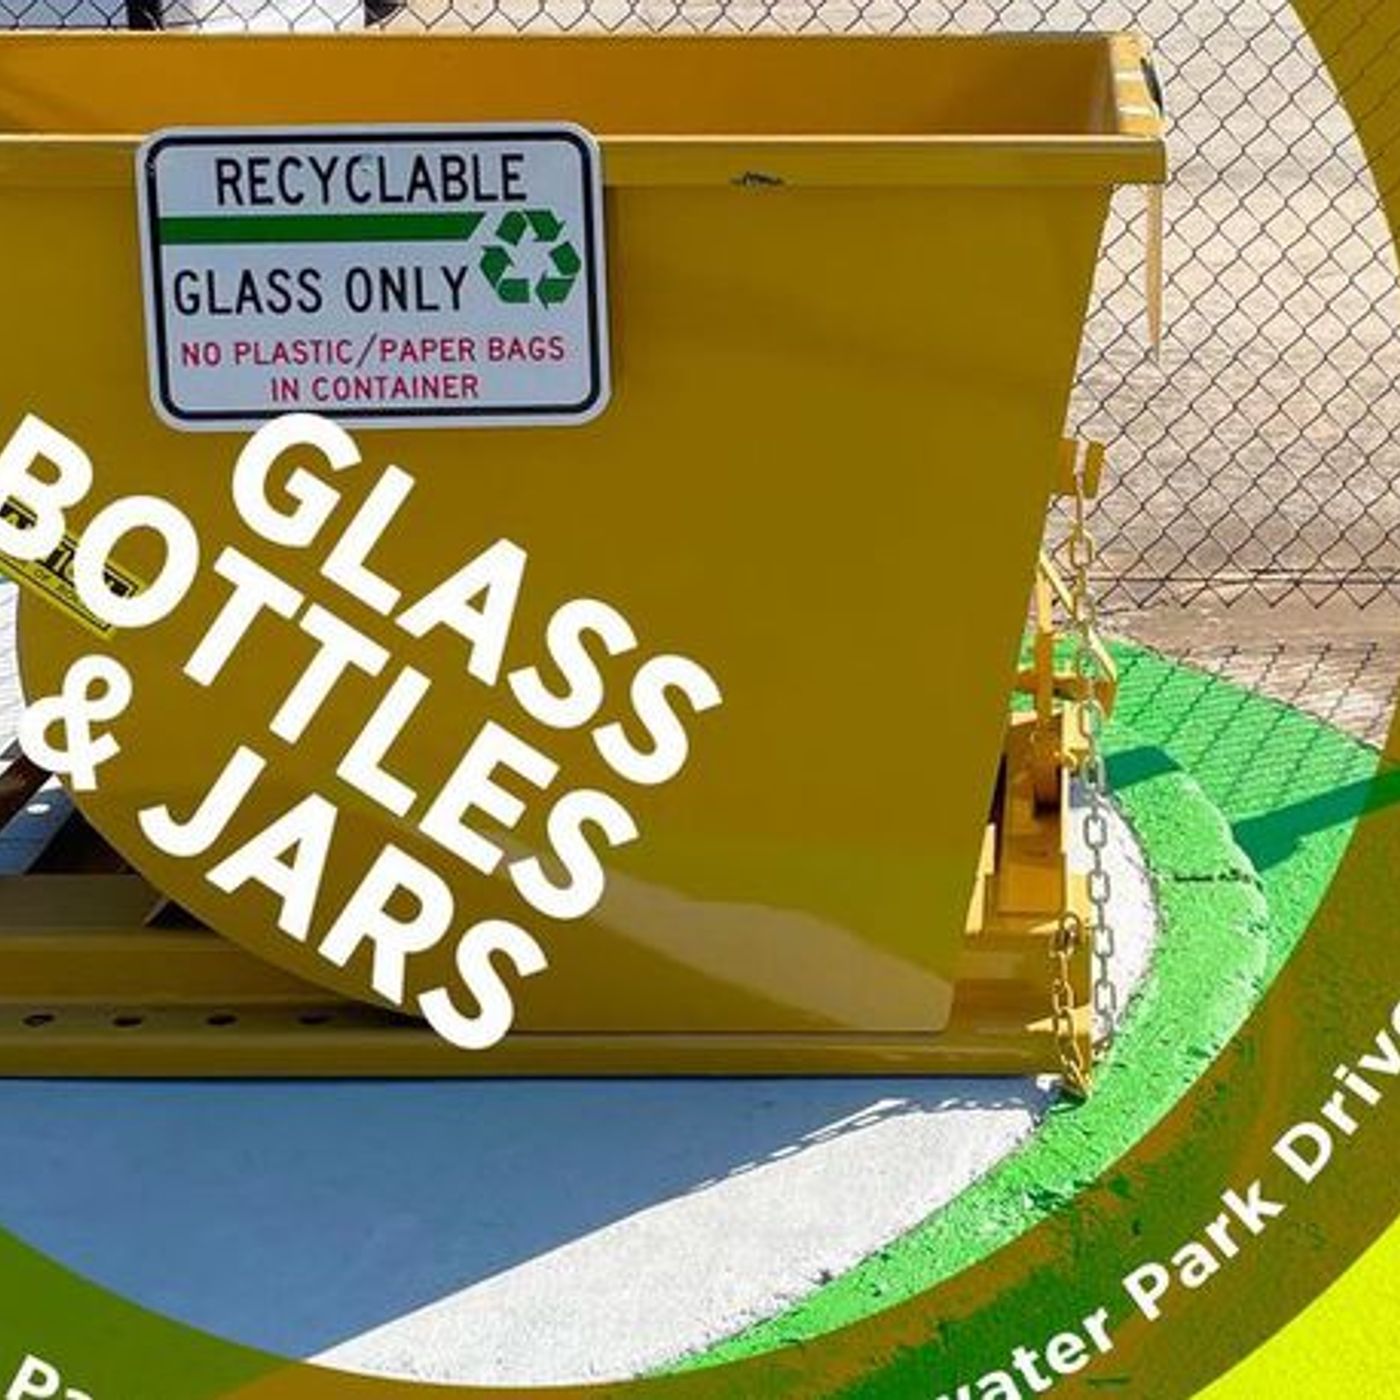 Glass Recycling Now Available In Suwanee Monday-Friday Image